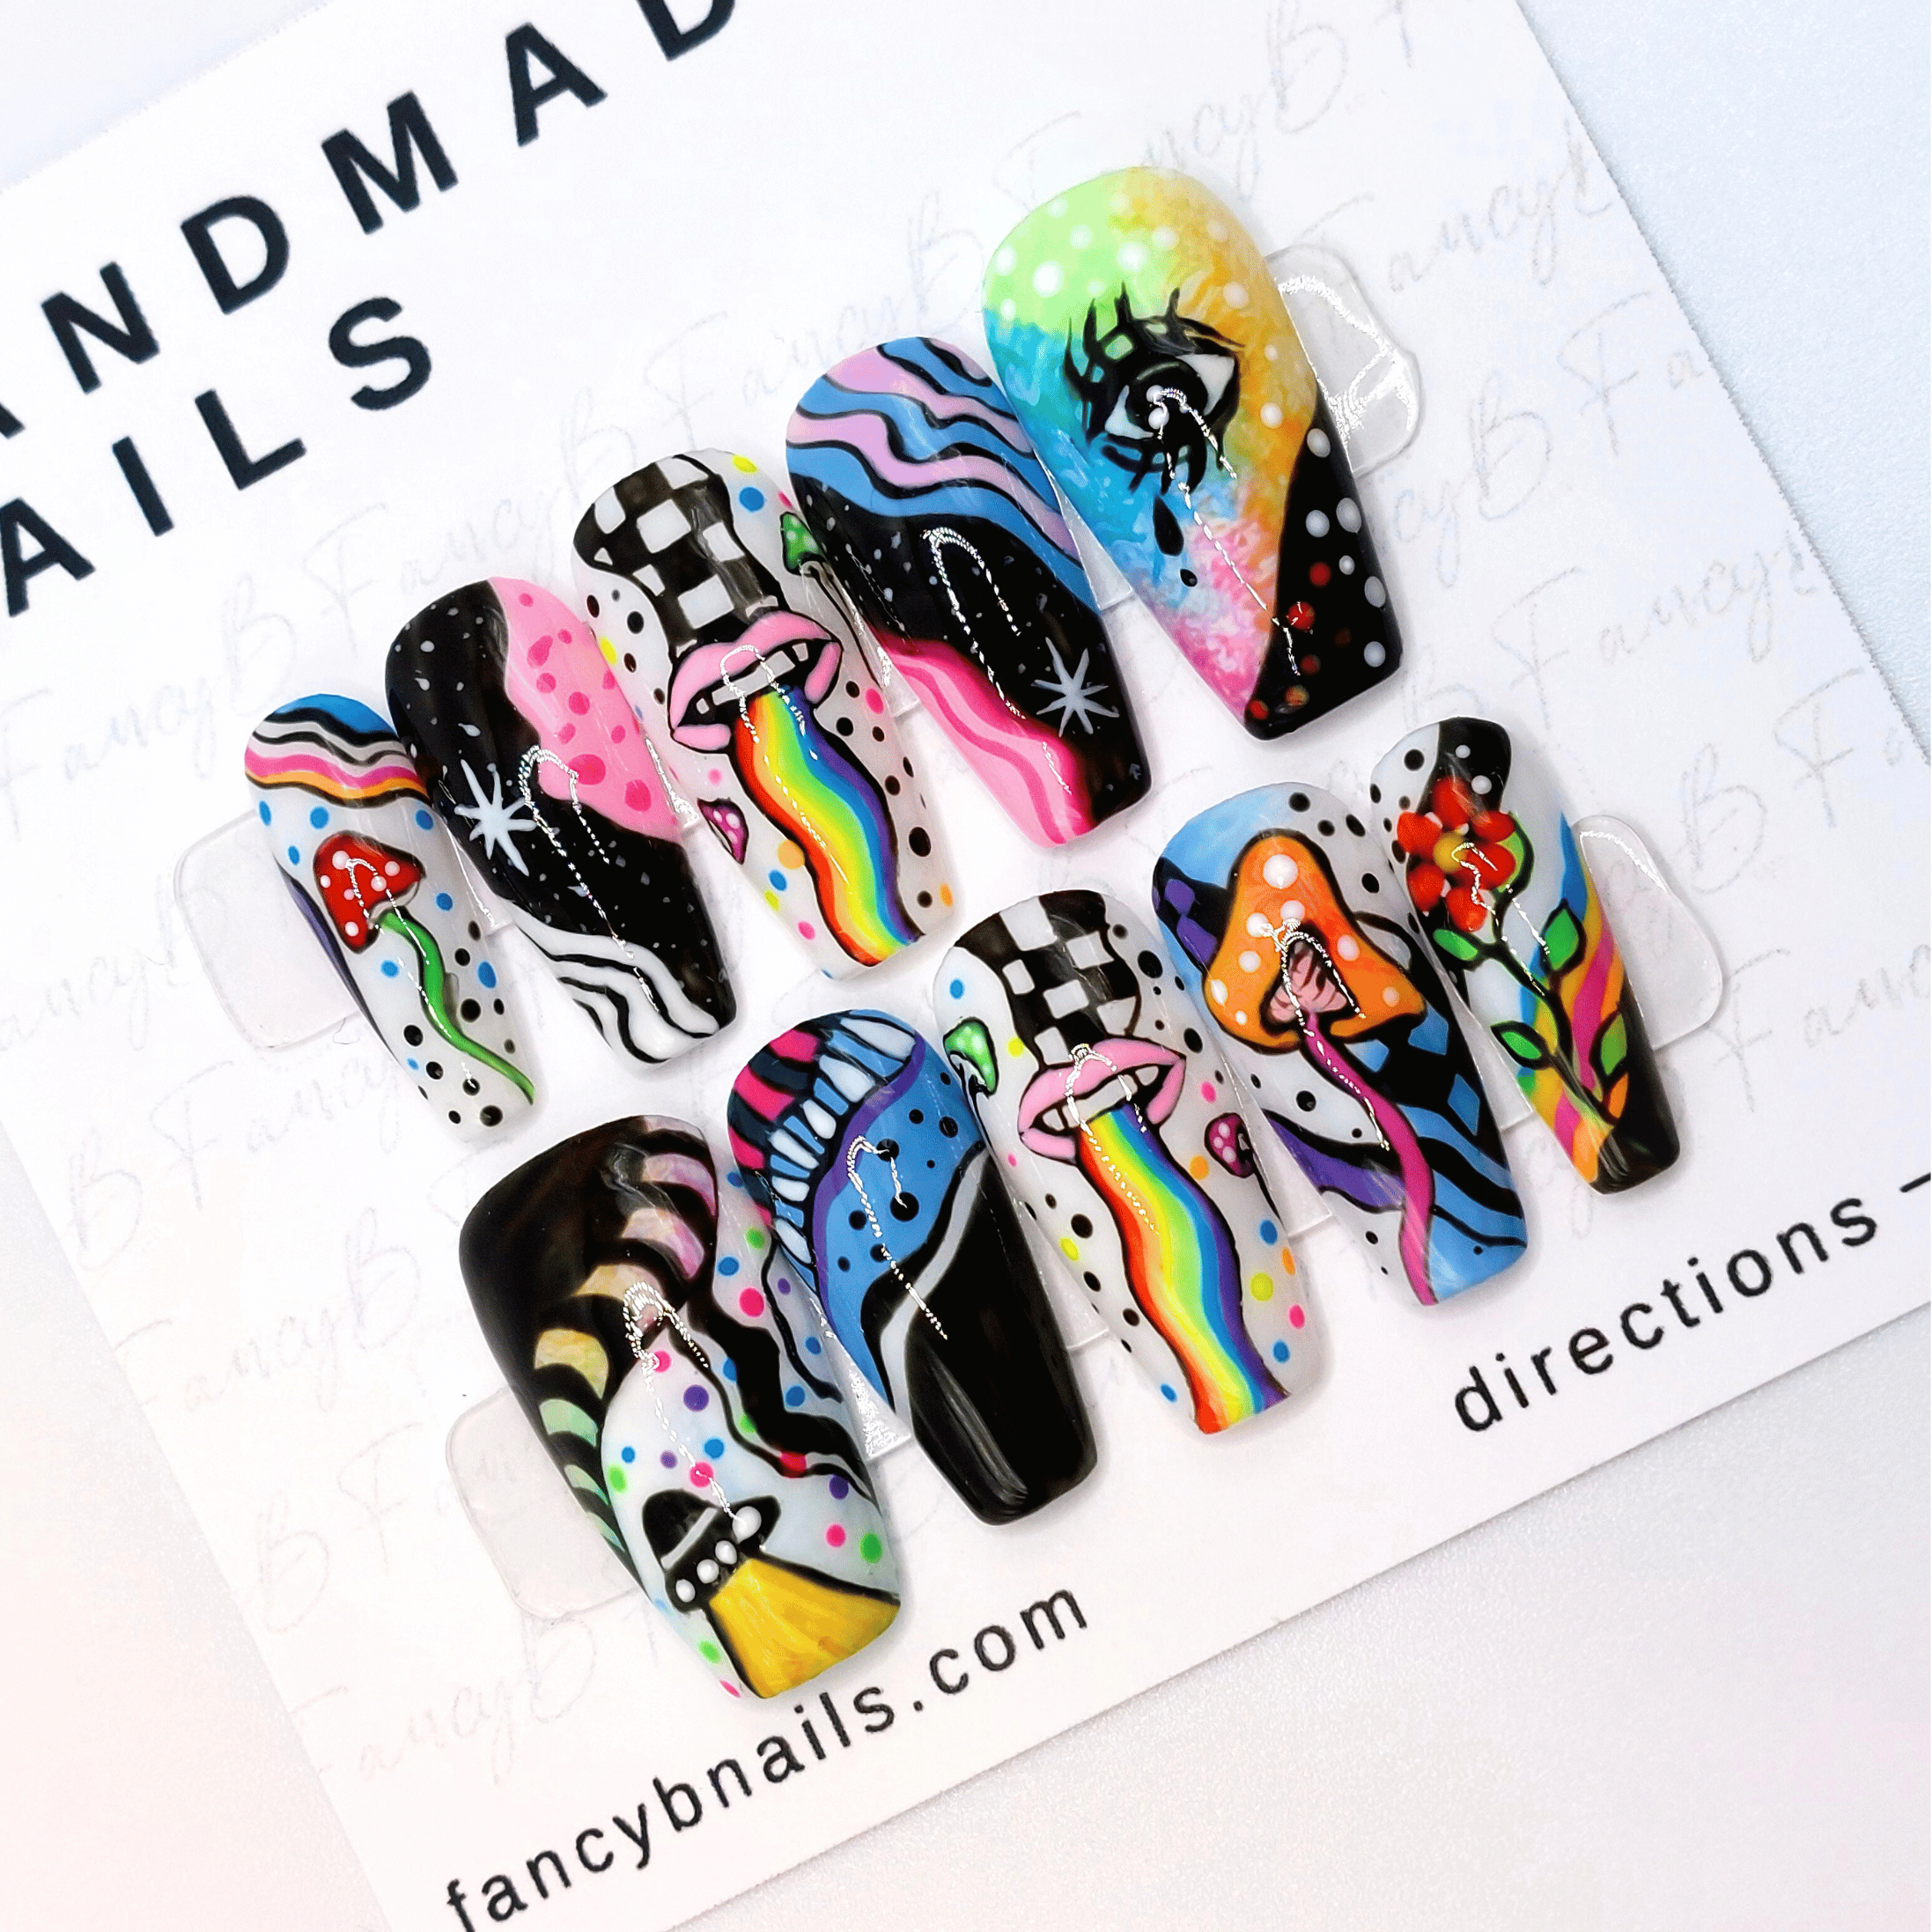 custom psychedelic nails, colorful trippy mushroom and rainbow nails with ufos and aliens, psychedelic press on nails in medium coffin, hand painted handmade nails from fancyb nails.